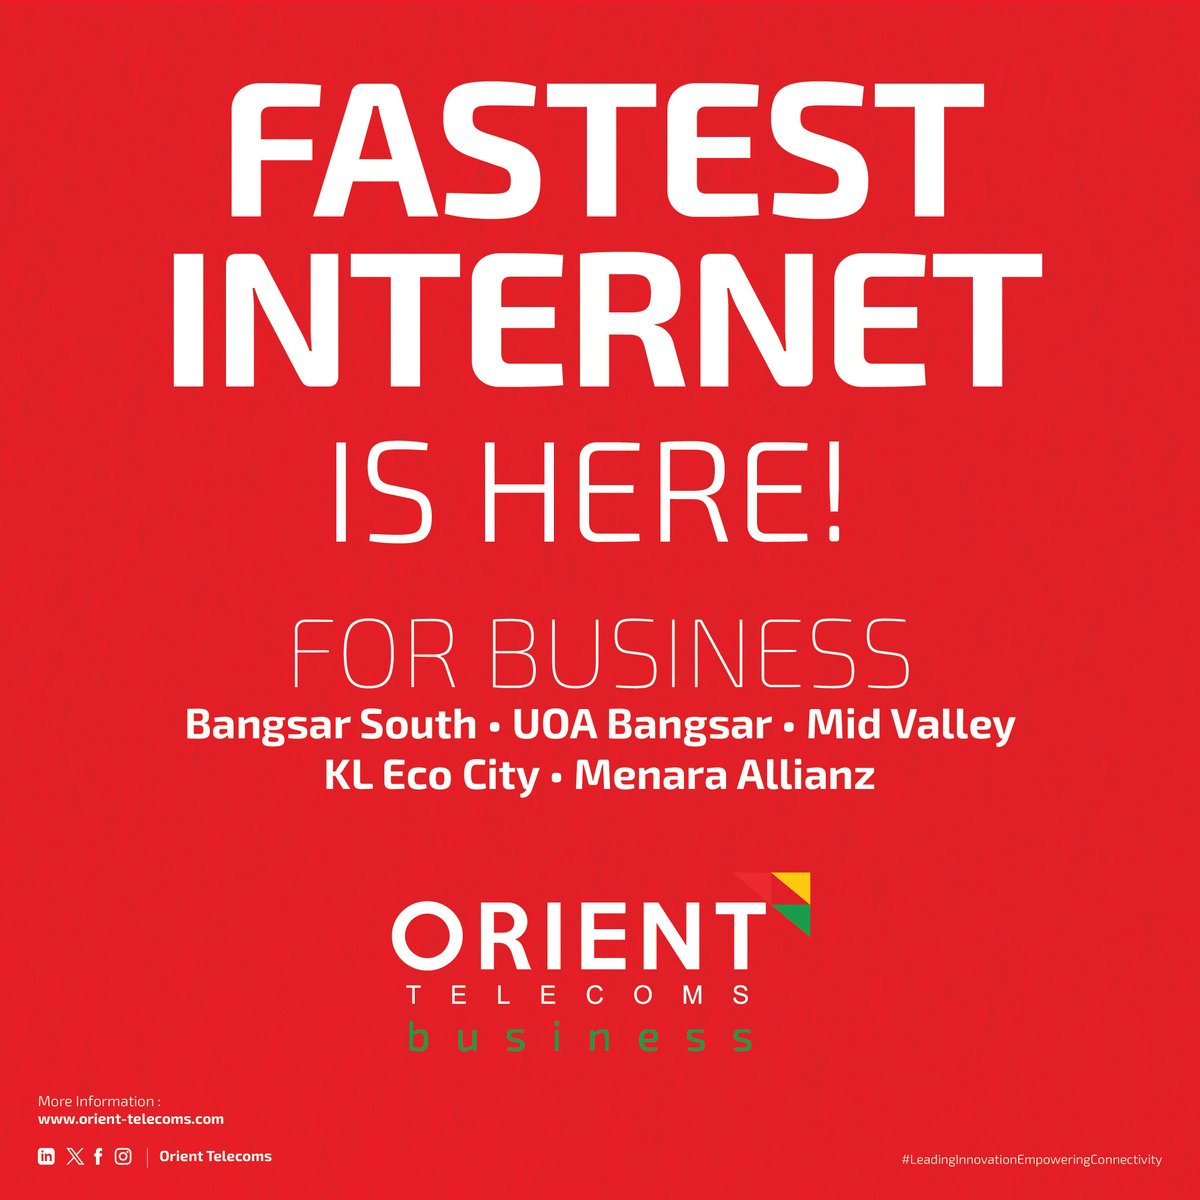 Unleash your business potential. Fibre connectivity & modern builds for a seamless workflow! Built for speed. 

Ready to break free from lagging internet? Fibre-ready buildings for the connected business

#fibre #BusinessConnected #BusinessSolutions